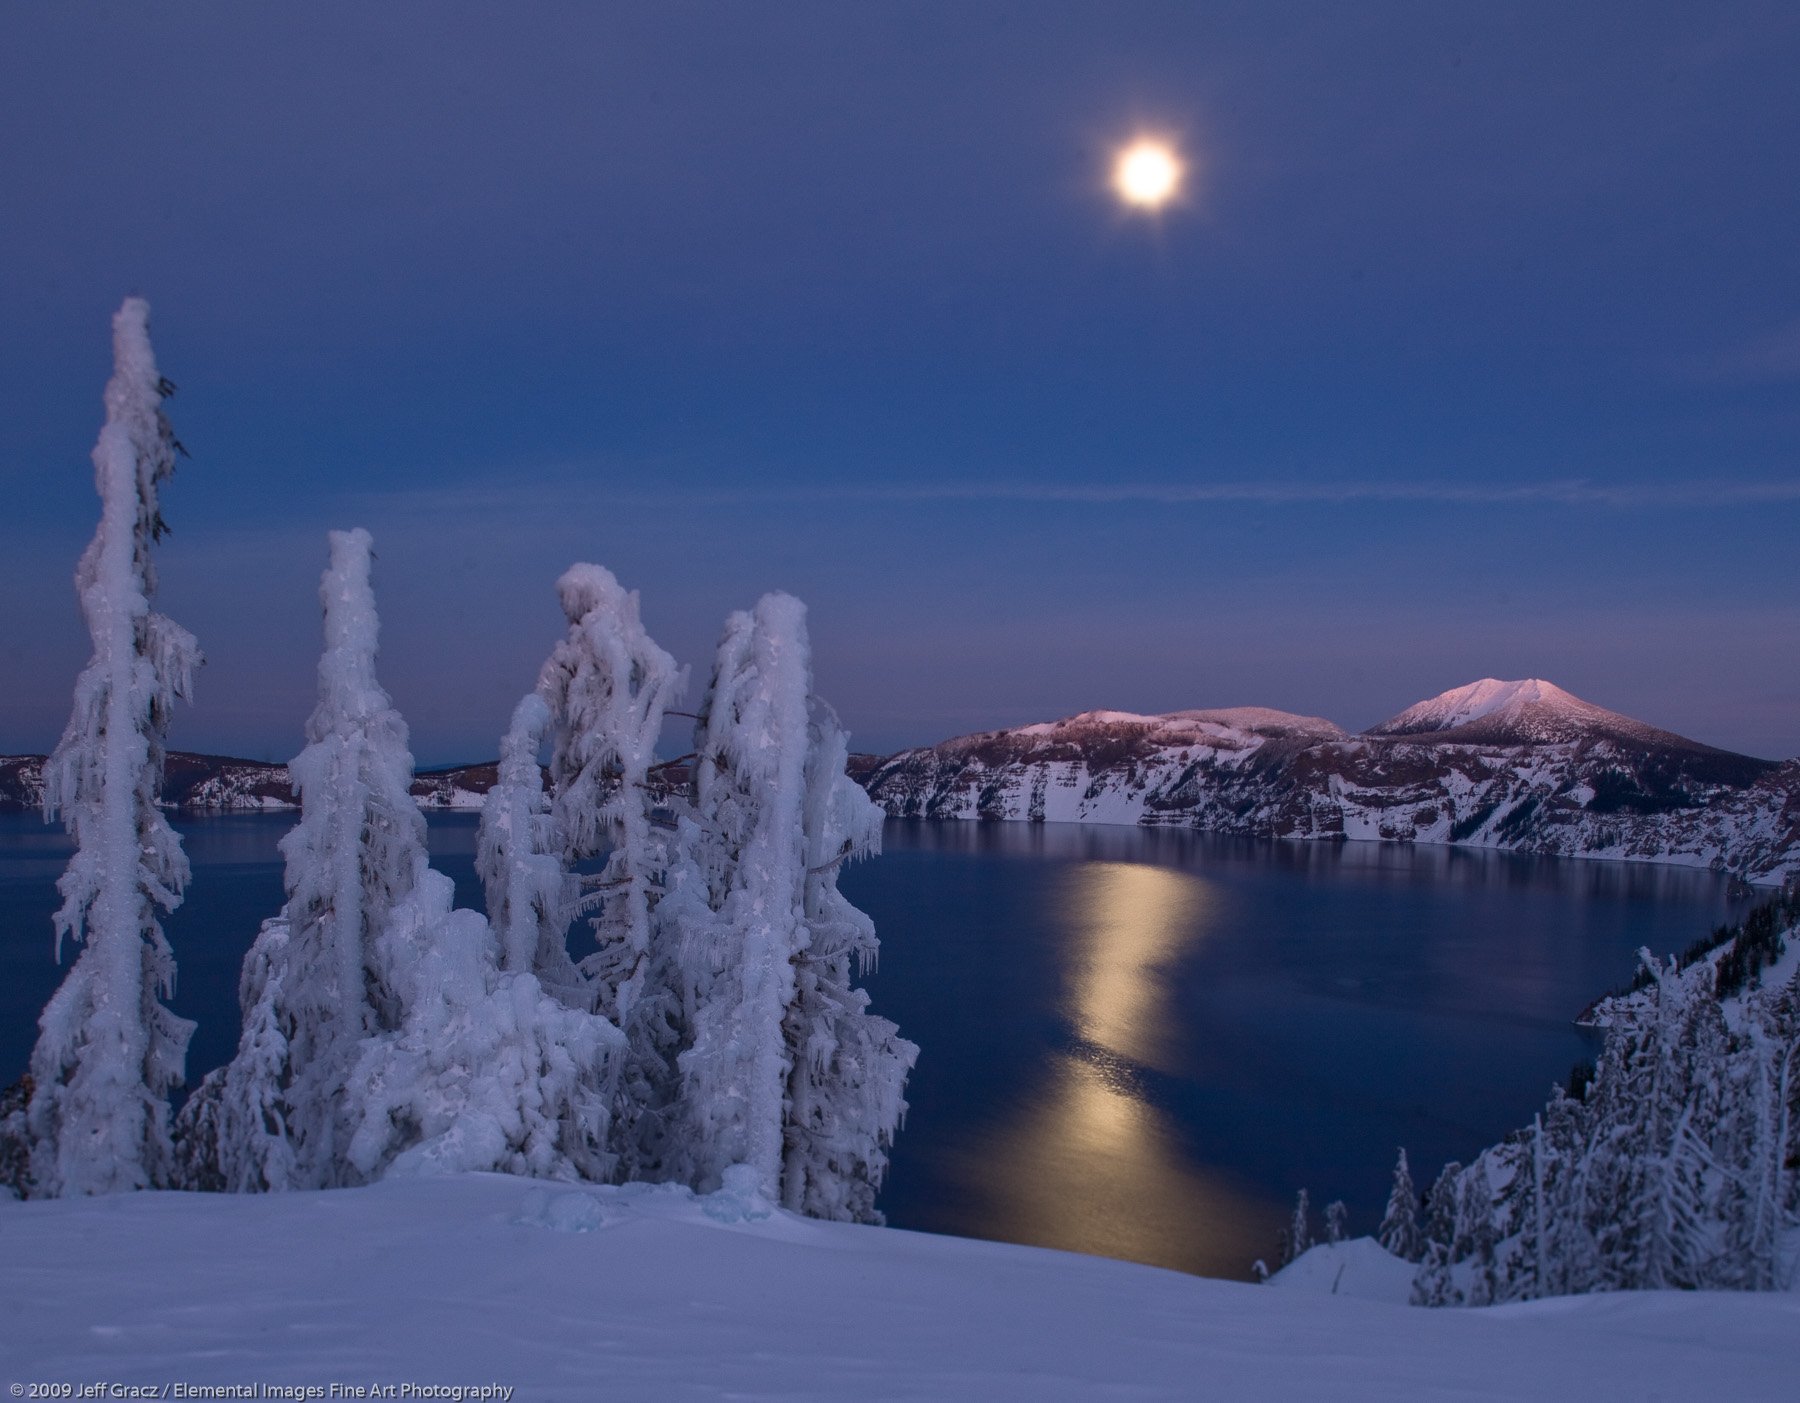 Evening light with full moon on Crater Lake | Crater Lake National Park | OR | USA - © © 2009 Jeff Gracz / Elemental Images Fine Art Photography - All Rights Reserved Worldwide